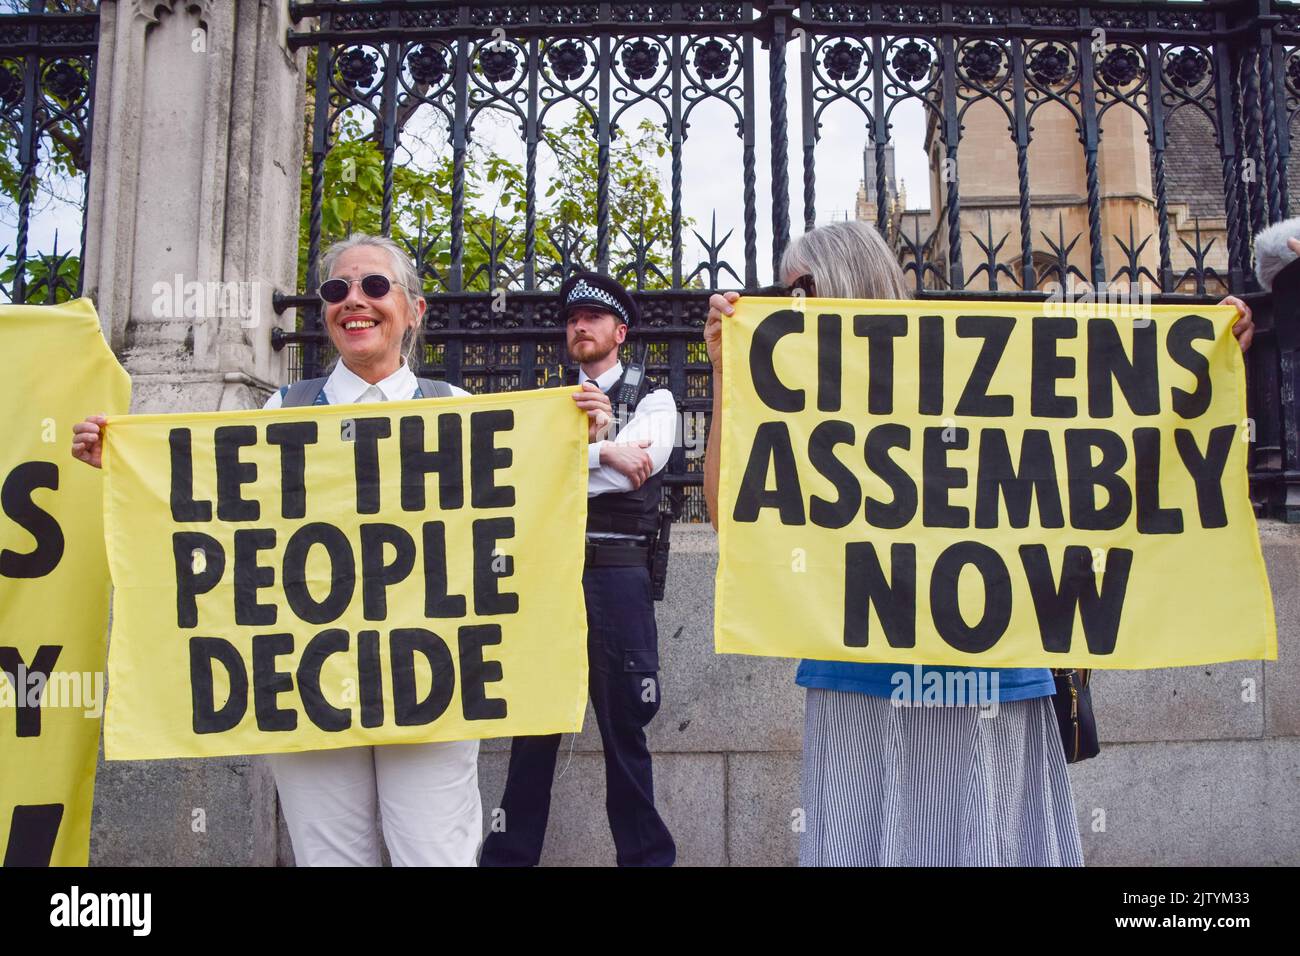 London, UK. 2nd September 2022. Protesters hold banners. Extinction Rebellion protesters glued themselves inside the Parliament while others locked and glued themselves outside, demanding a Citizens' Assembly. Credit: Vuk Valcic/Alamy Live News Stock Photo